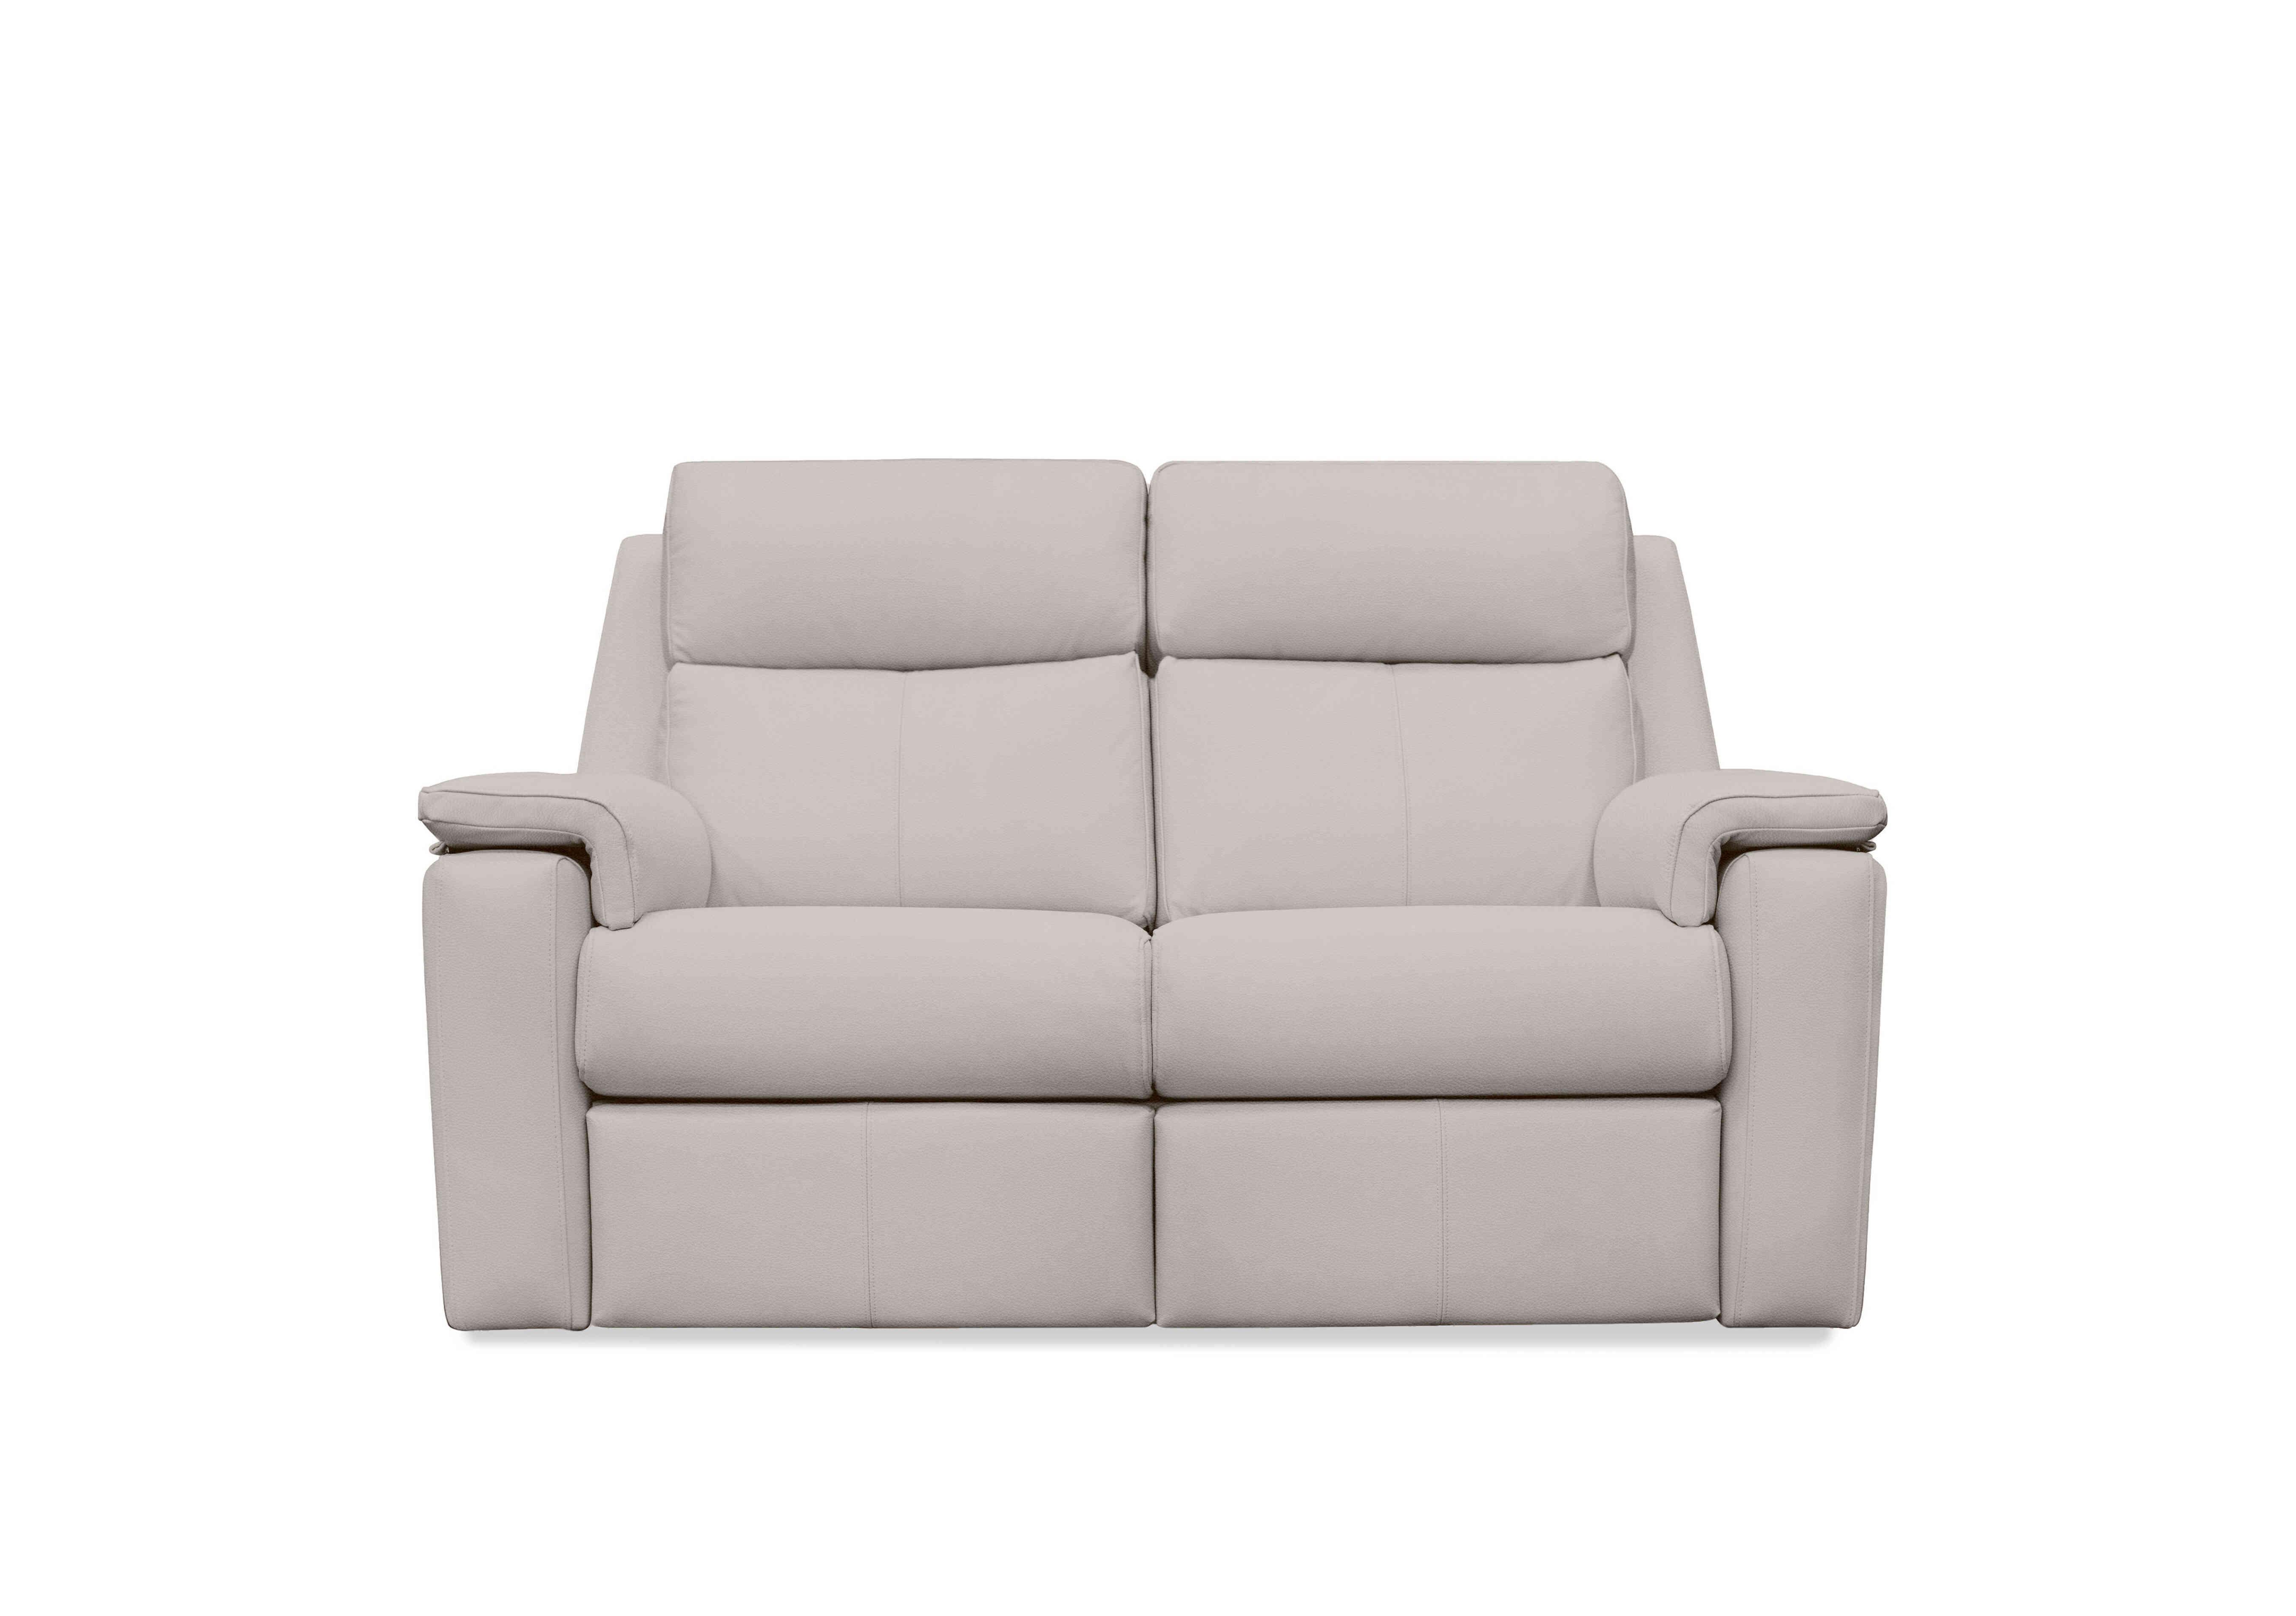 Thornbury 2 Seater Leather Power Recliner Sofa with Power Headrests and Power Lumbar in L840 Cambridge Chalk on Furniture Village